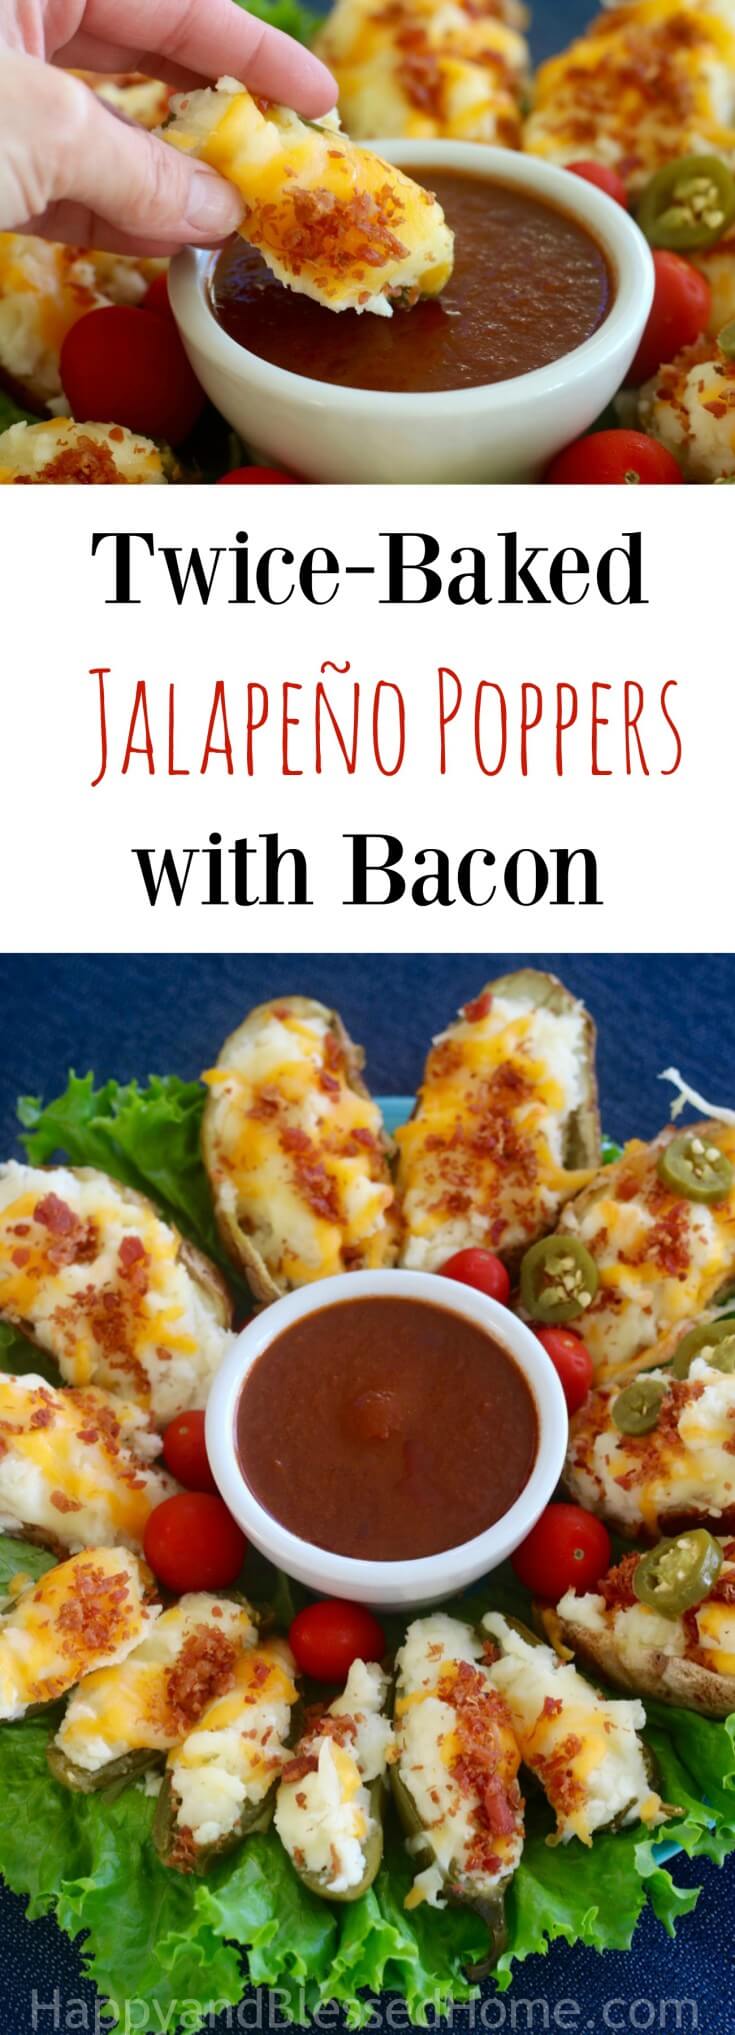 Easy Appetizer Recipe for Twice-Baked Jalapeño Poppers with Bacon